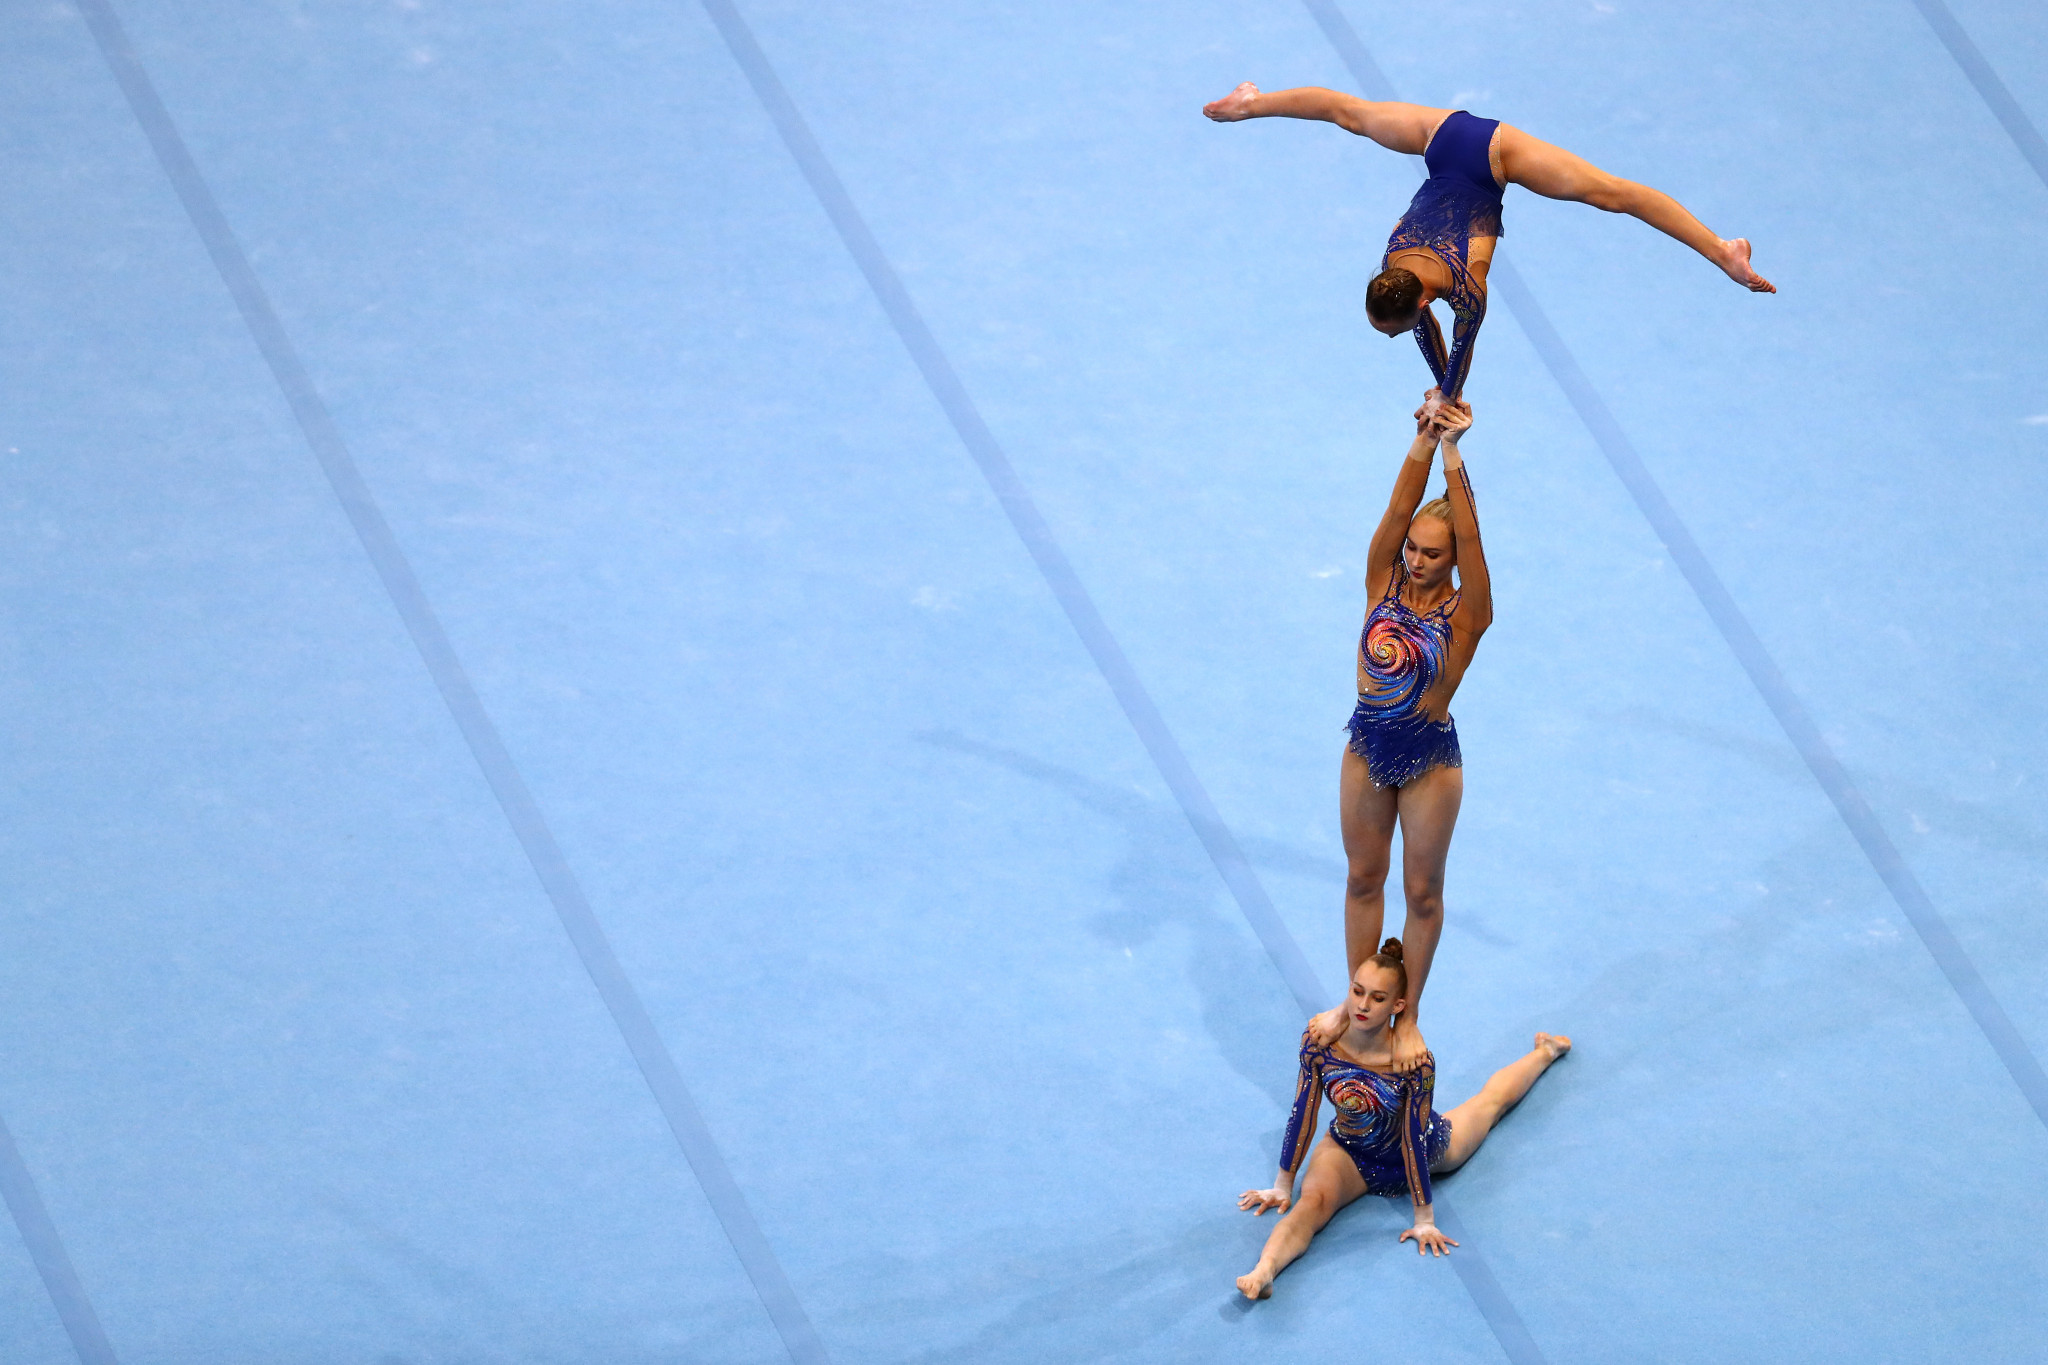 New dates for the Acrobatic Gymnastics World Championships have been revealed ©Getty Images